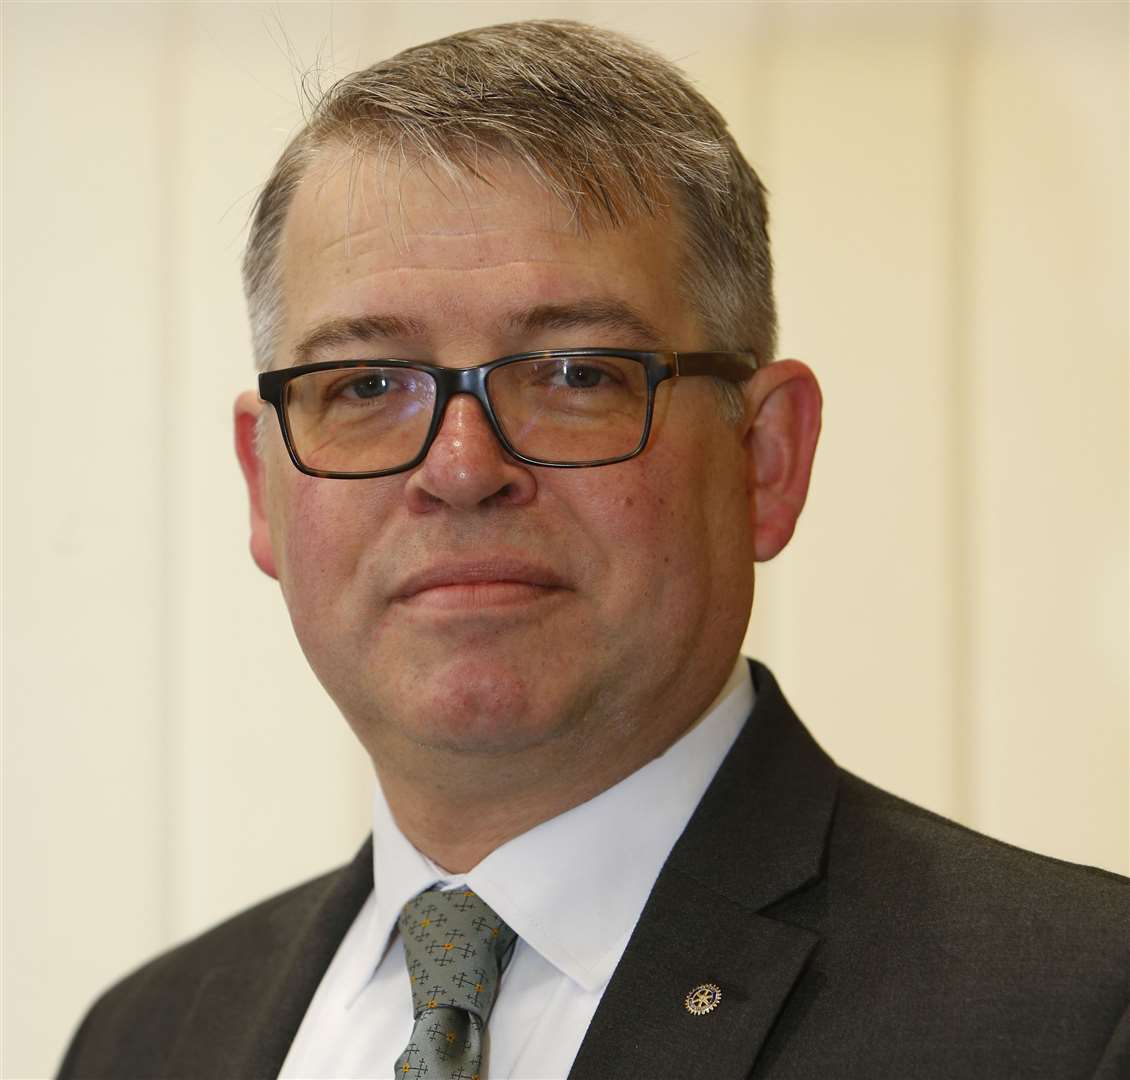 Martin Cox was re-elected as council leader